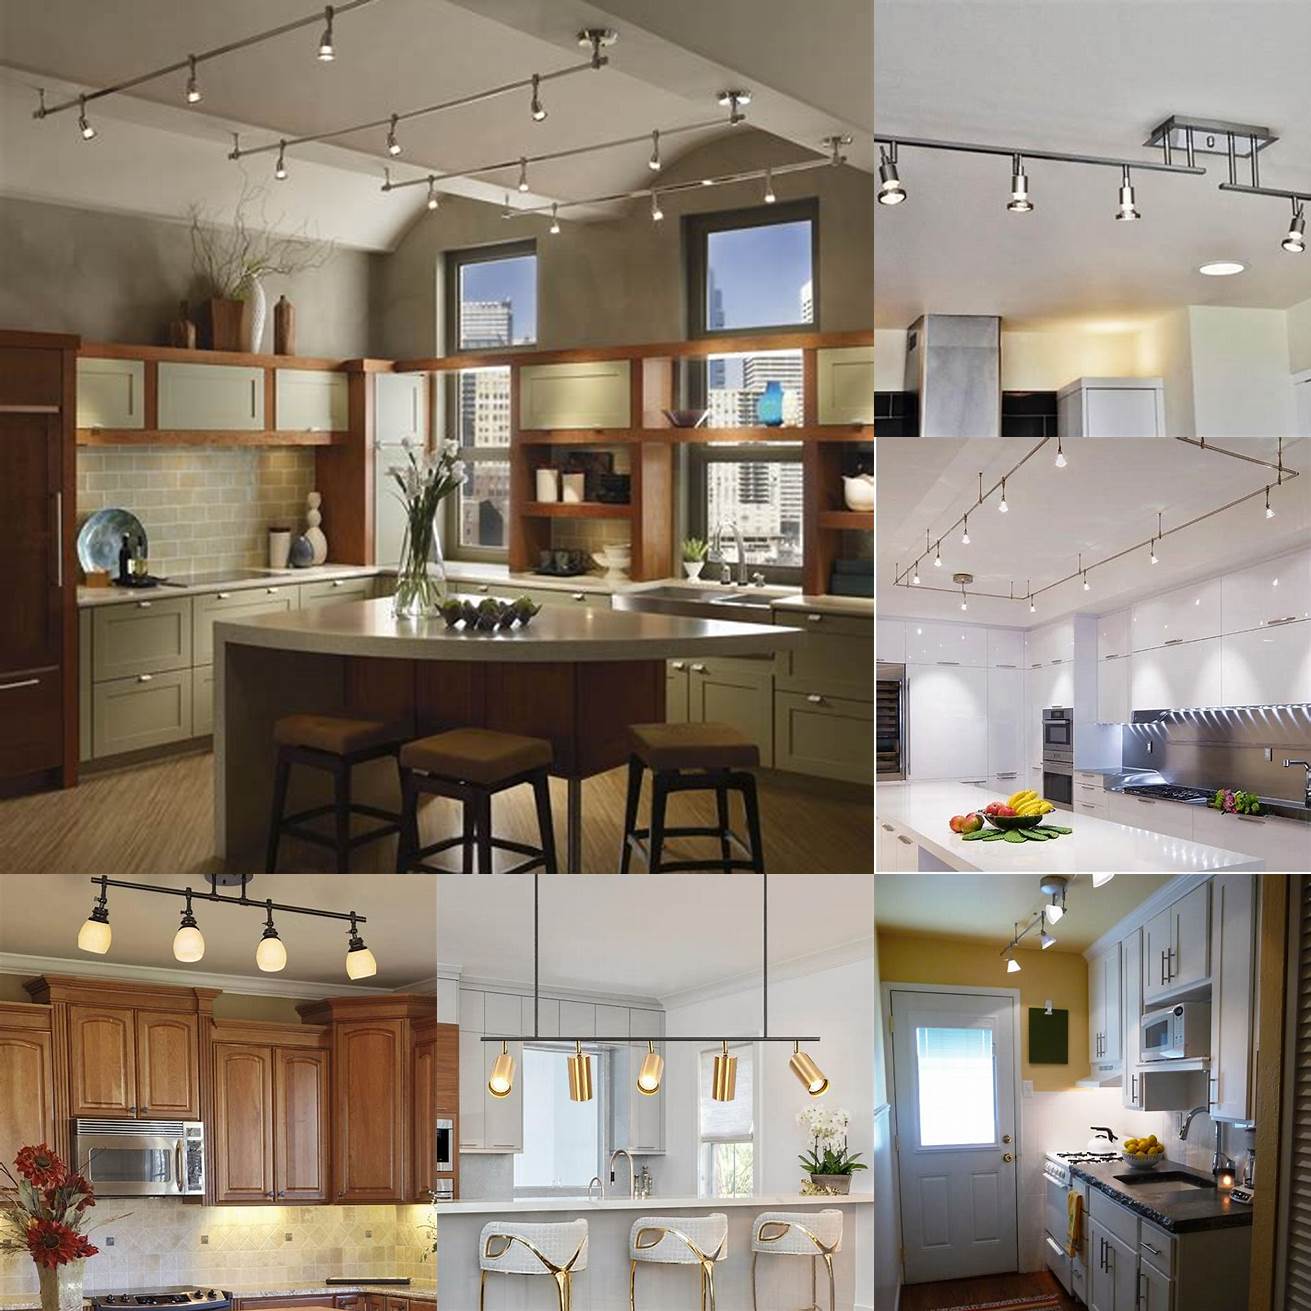 Track lighting is a versatile option that can be used to highlight specific areas of your kitchen